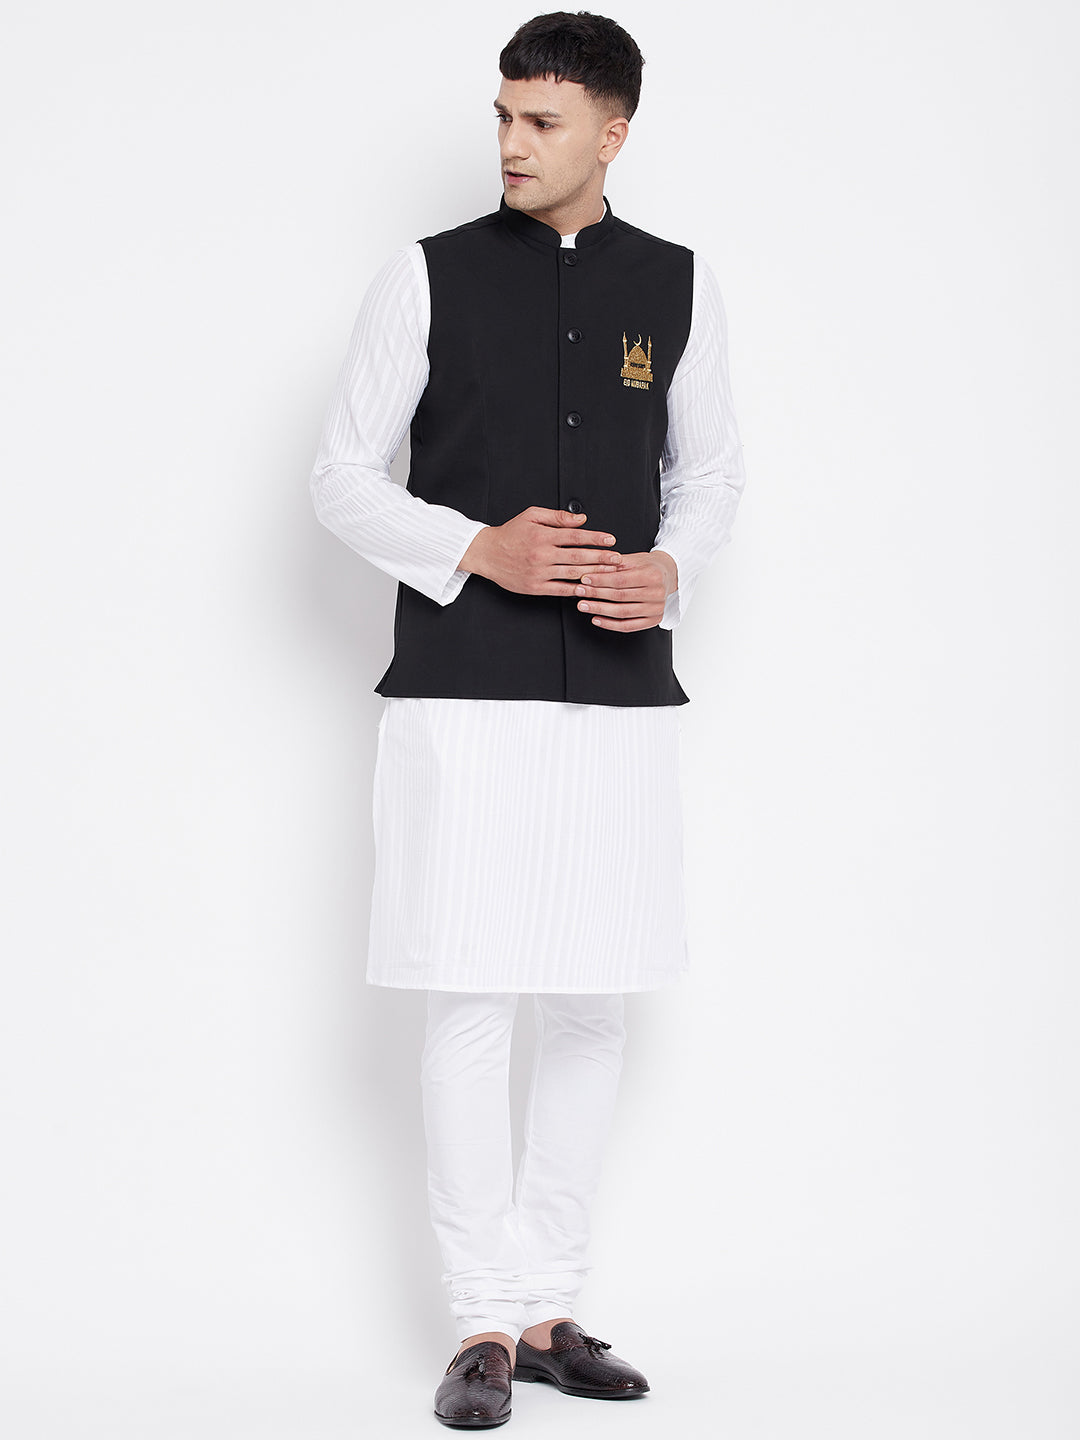 Men's White Kurta Sets with Eid Insignia Jackets (2PC)- Even Apparels